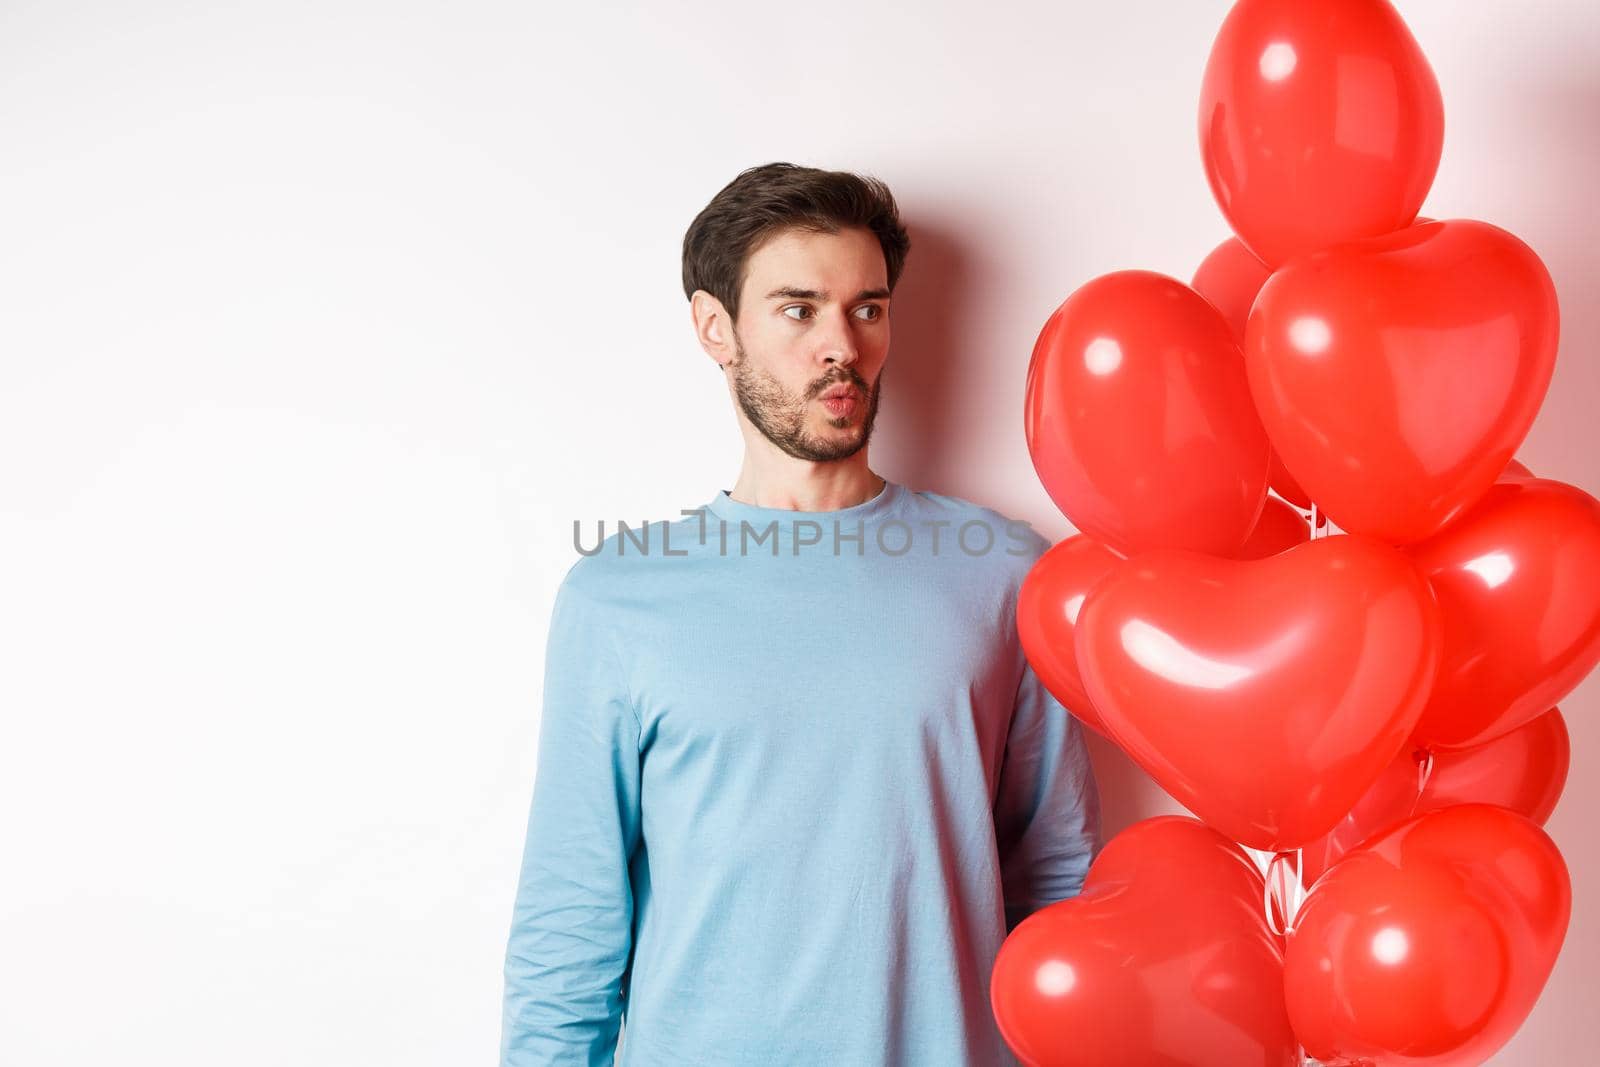 Relationship. Young man looking confused at heart balloon, puzzled on valetines day, standing over white background.